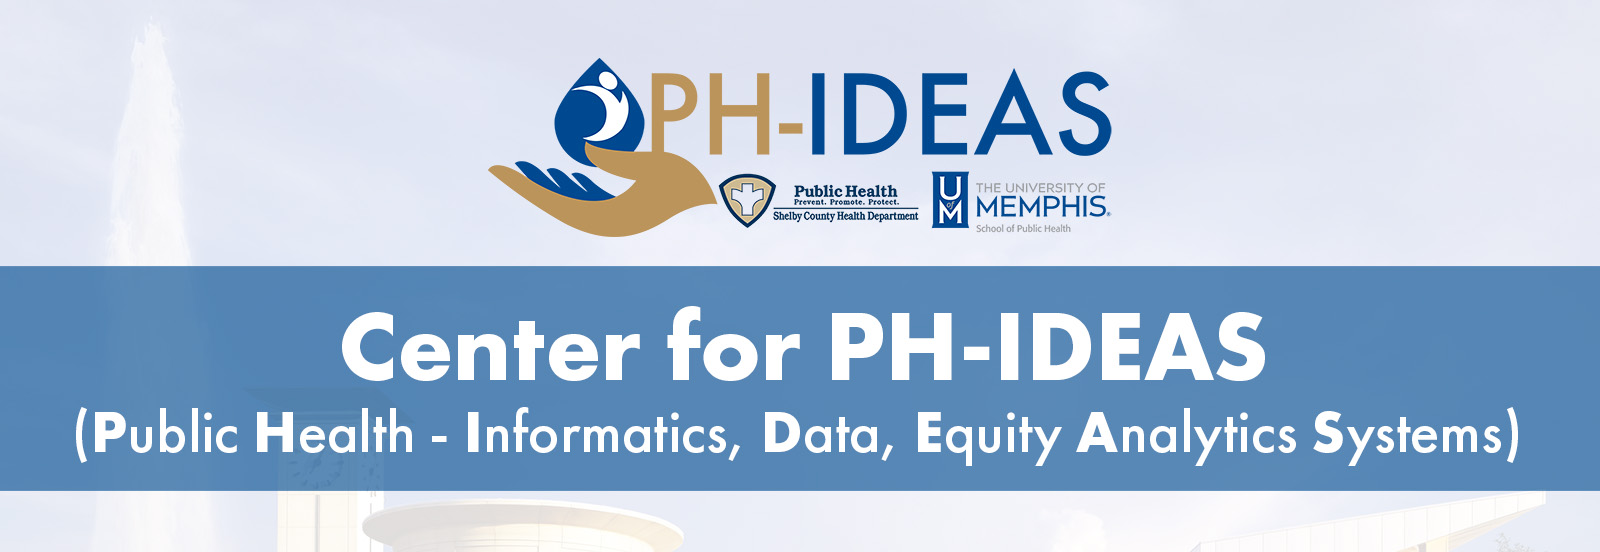 Title: Center for Public Health IDEAS (Public Health Informatics, Data, Equity, Analysis Systems)